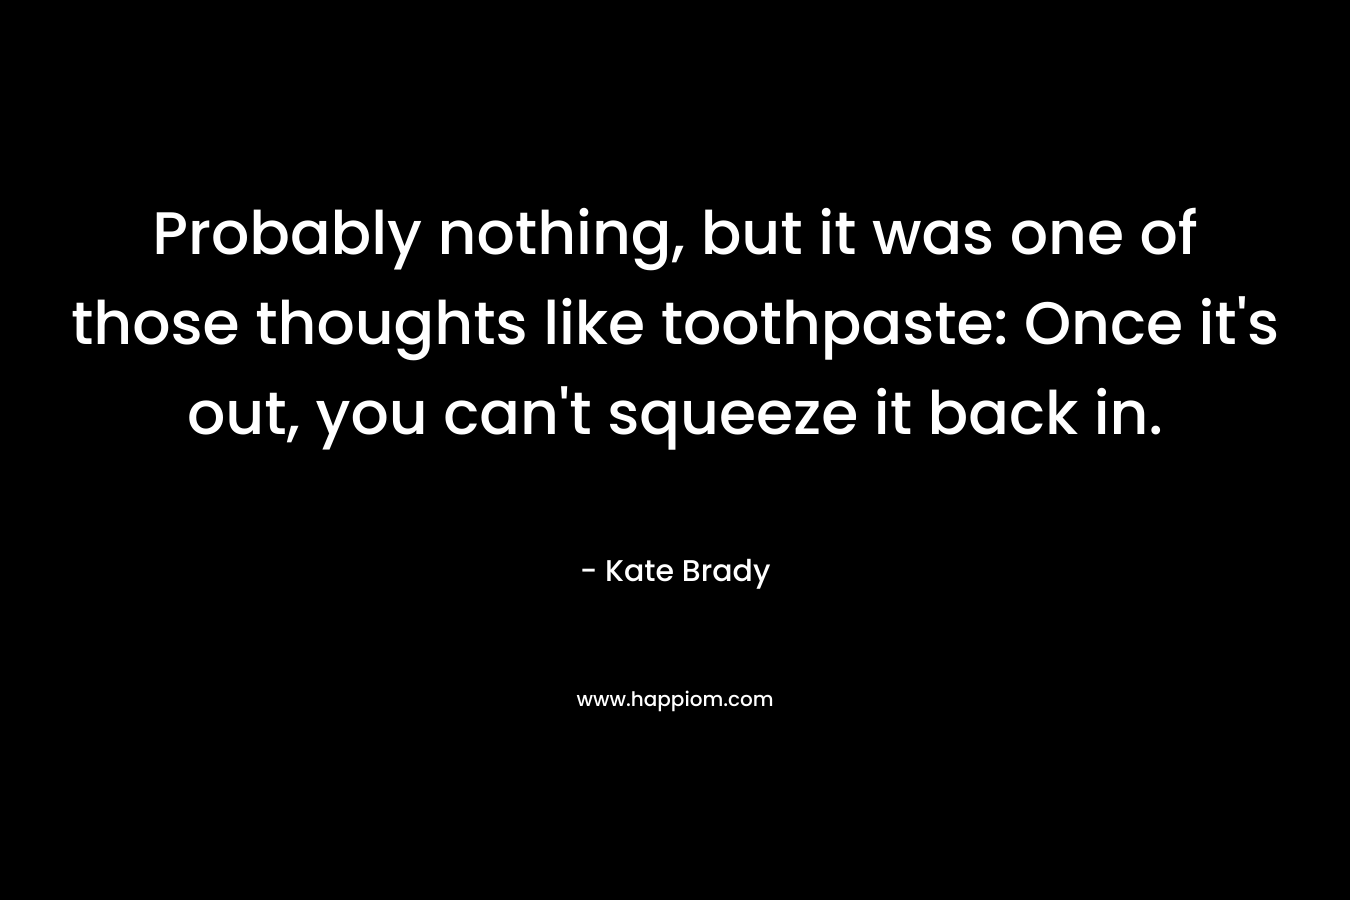 Probably nothing, but it was one of those thoughts like toothpaste: Once it’s out, you can’t squeeze it back in. – Kate Brady